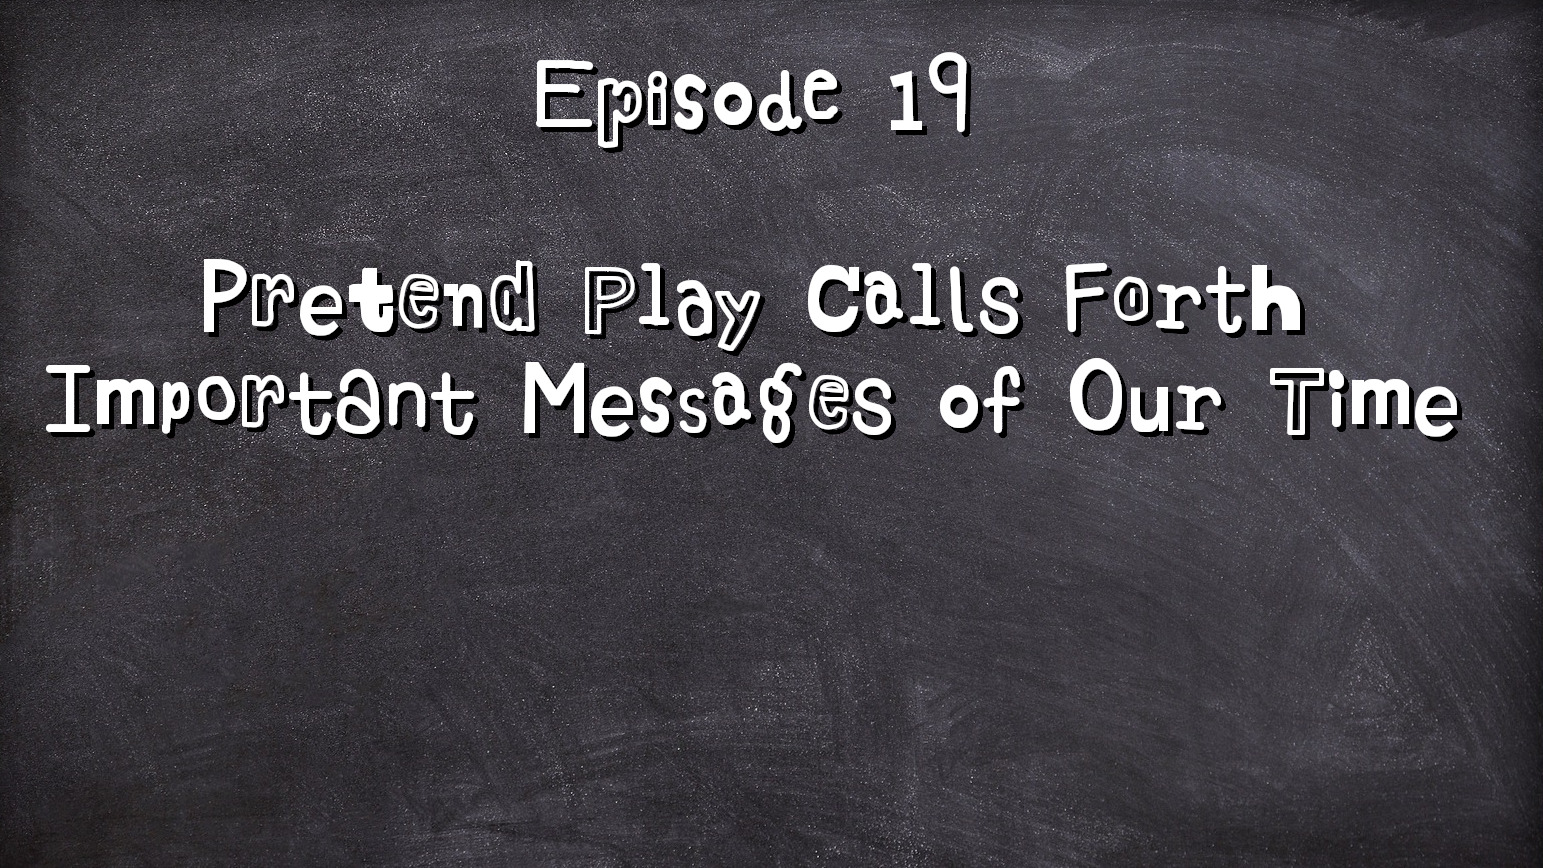 Episode 19: Pretend Play Calls Forth Important Messages of Our Time